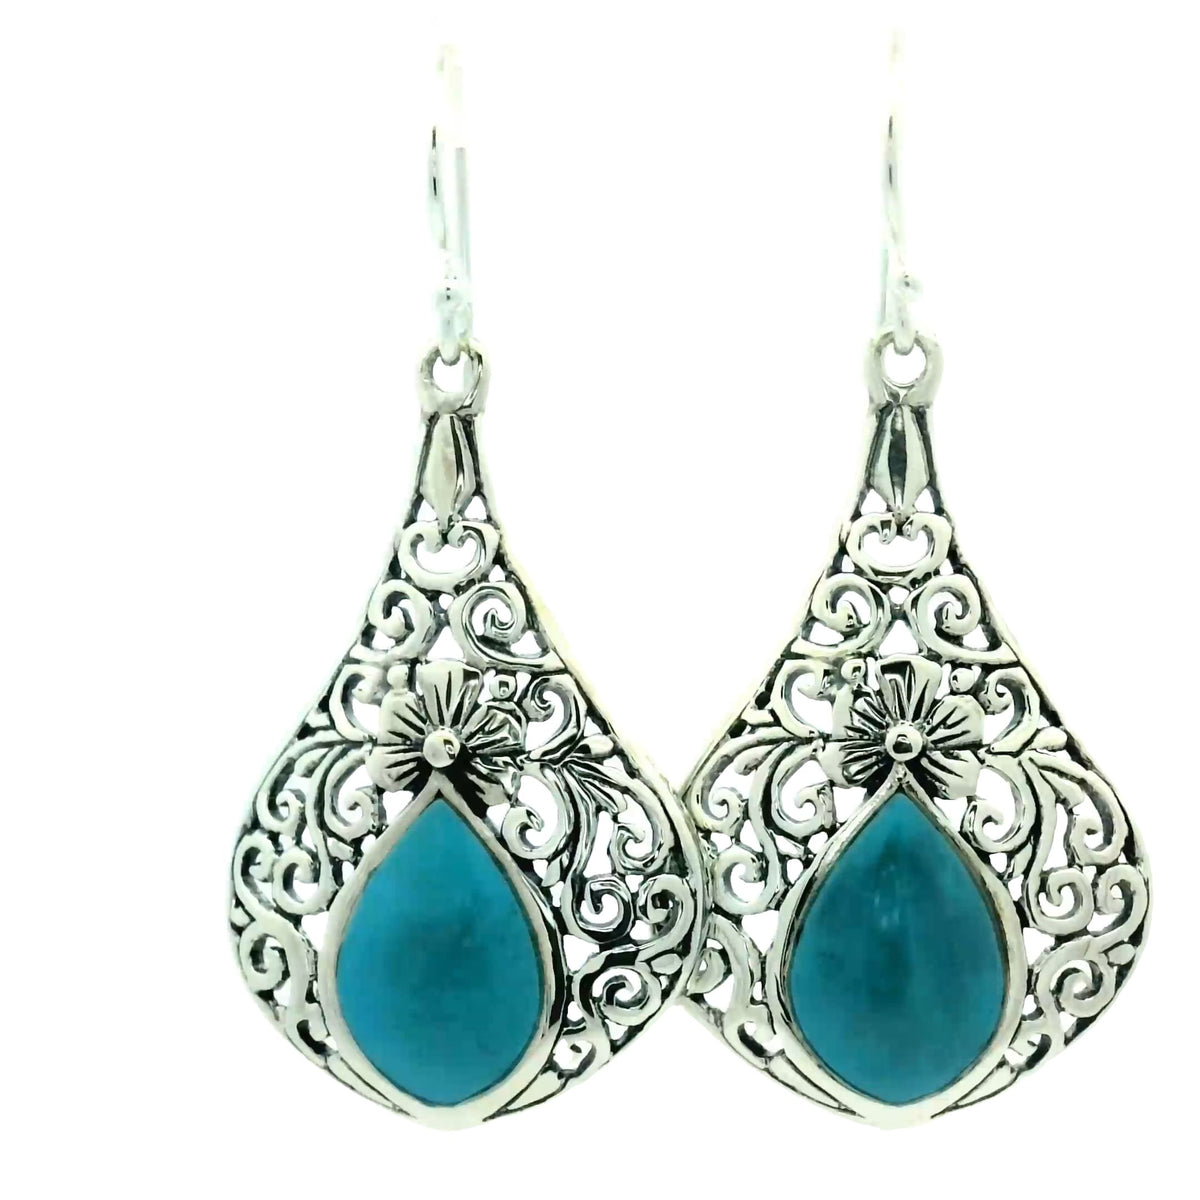 Onatah Sterling Silver Filigree Drop Earrings With Turquoise